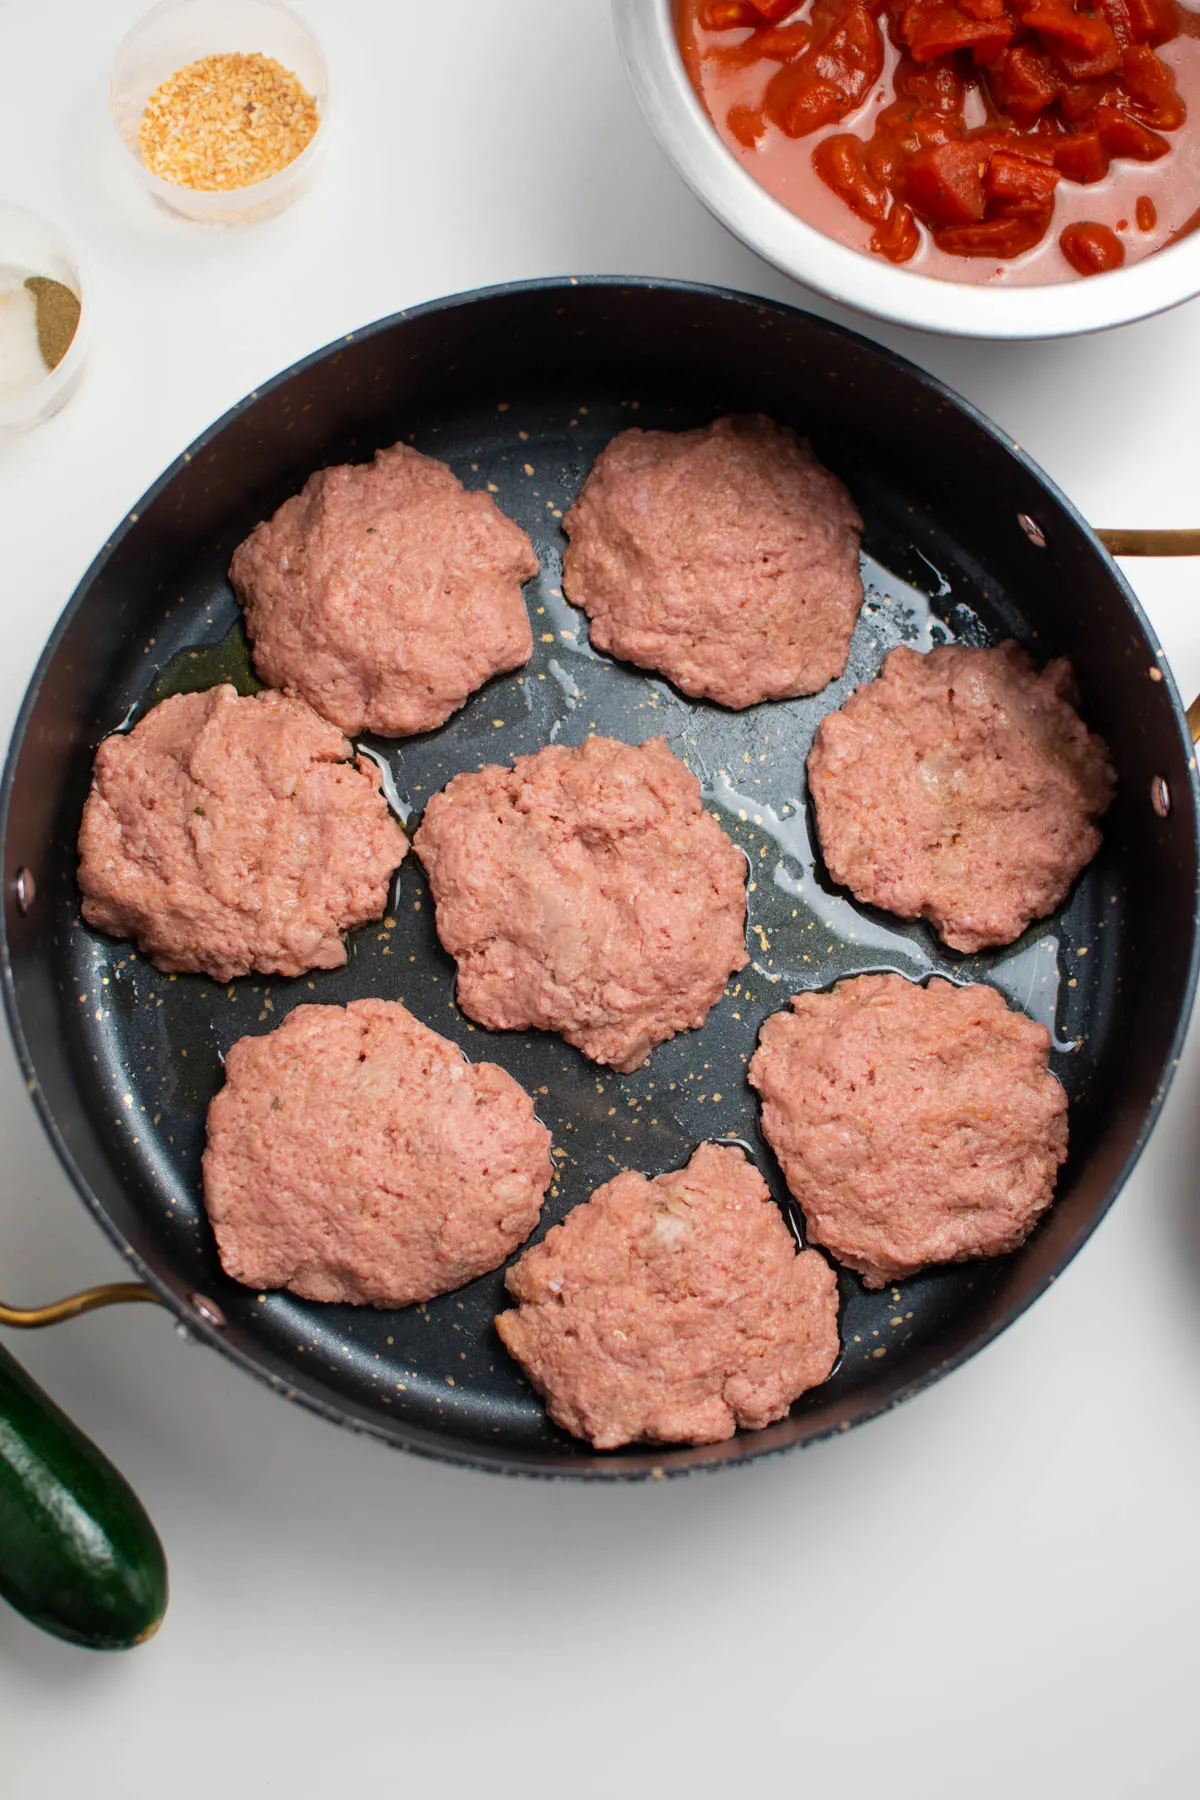 Eight raw turkey patties in large black skillet with bowl of diced tomatoes nearby.